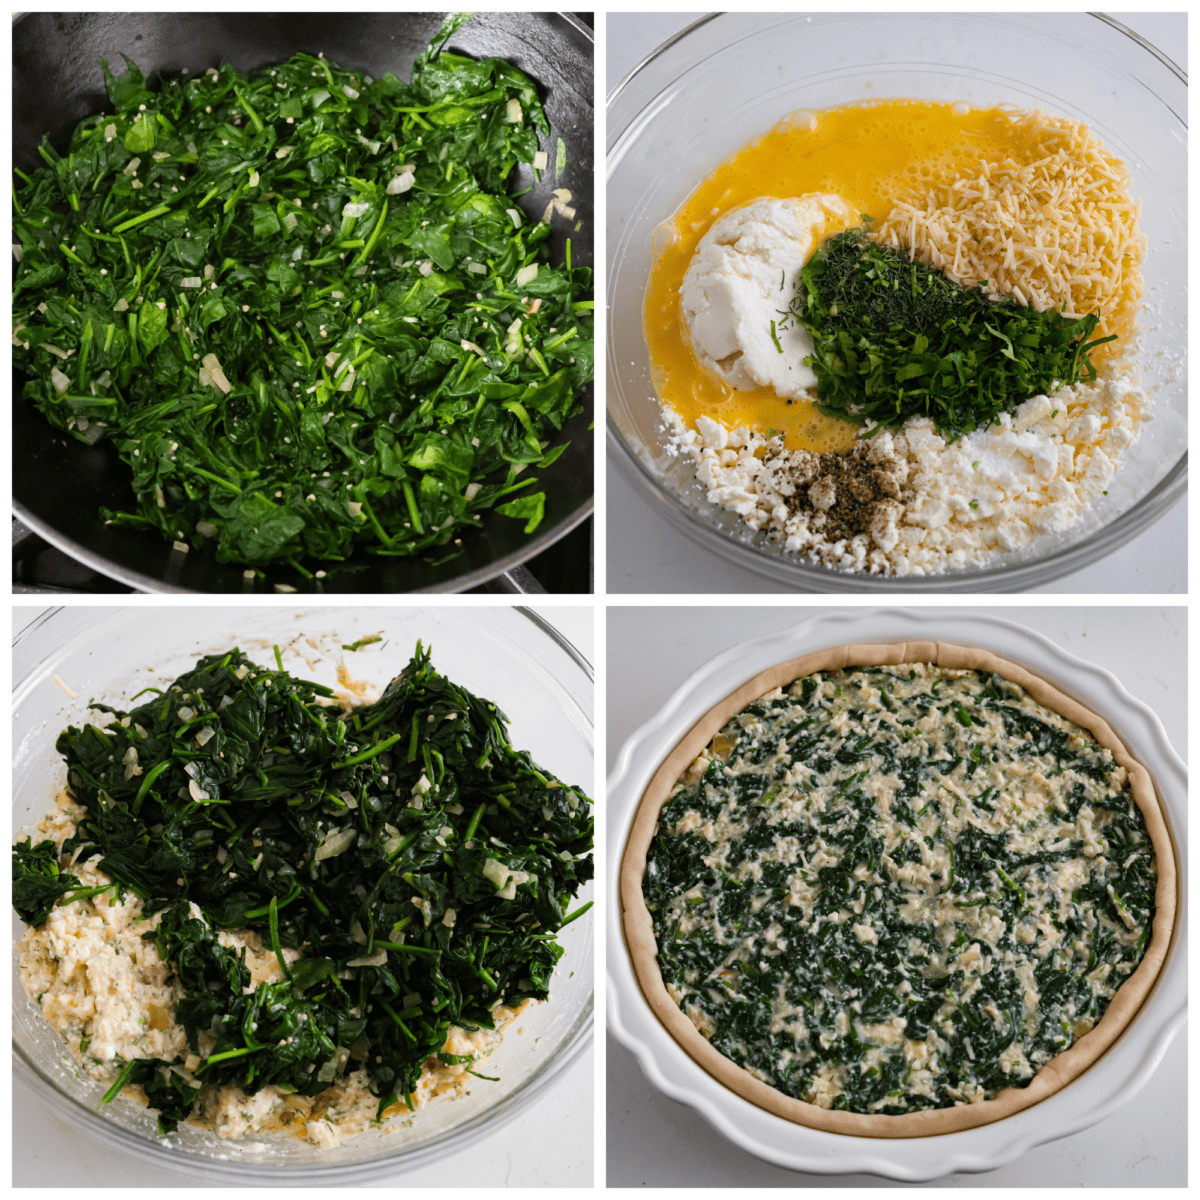 First photo of the spinach, onion, and garlic sauteed in a pan. Second photo of the egg and cheese ingredients in a bowl. Third photo of the spinach mixture added to the cheese mixture. Fourth photo of the filling added to the pie dish.